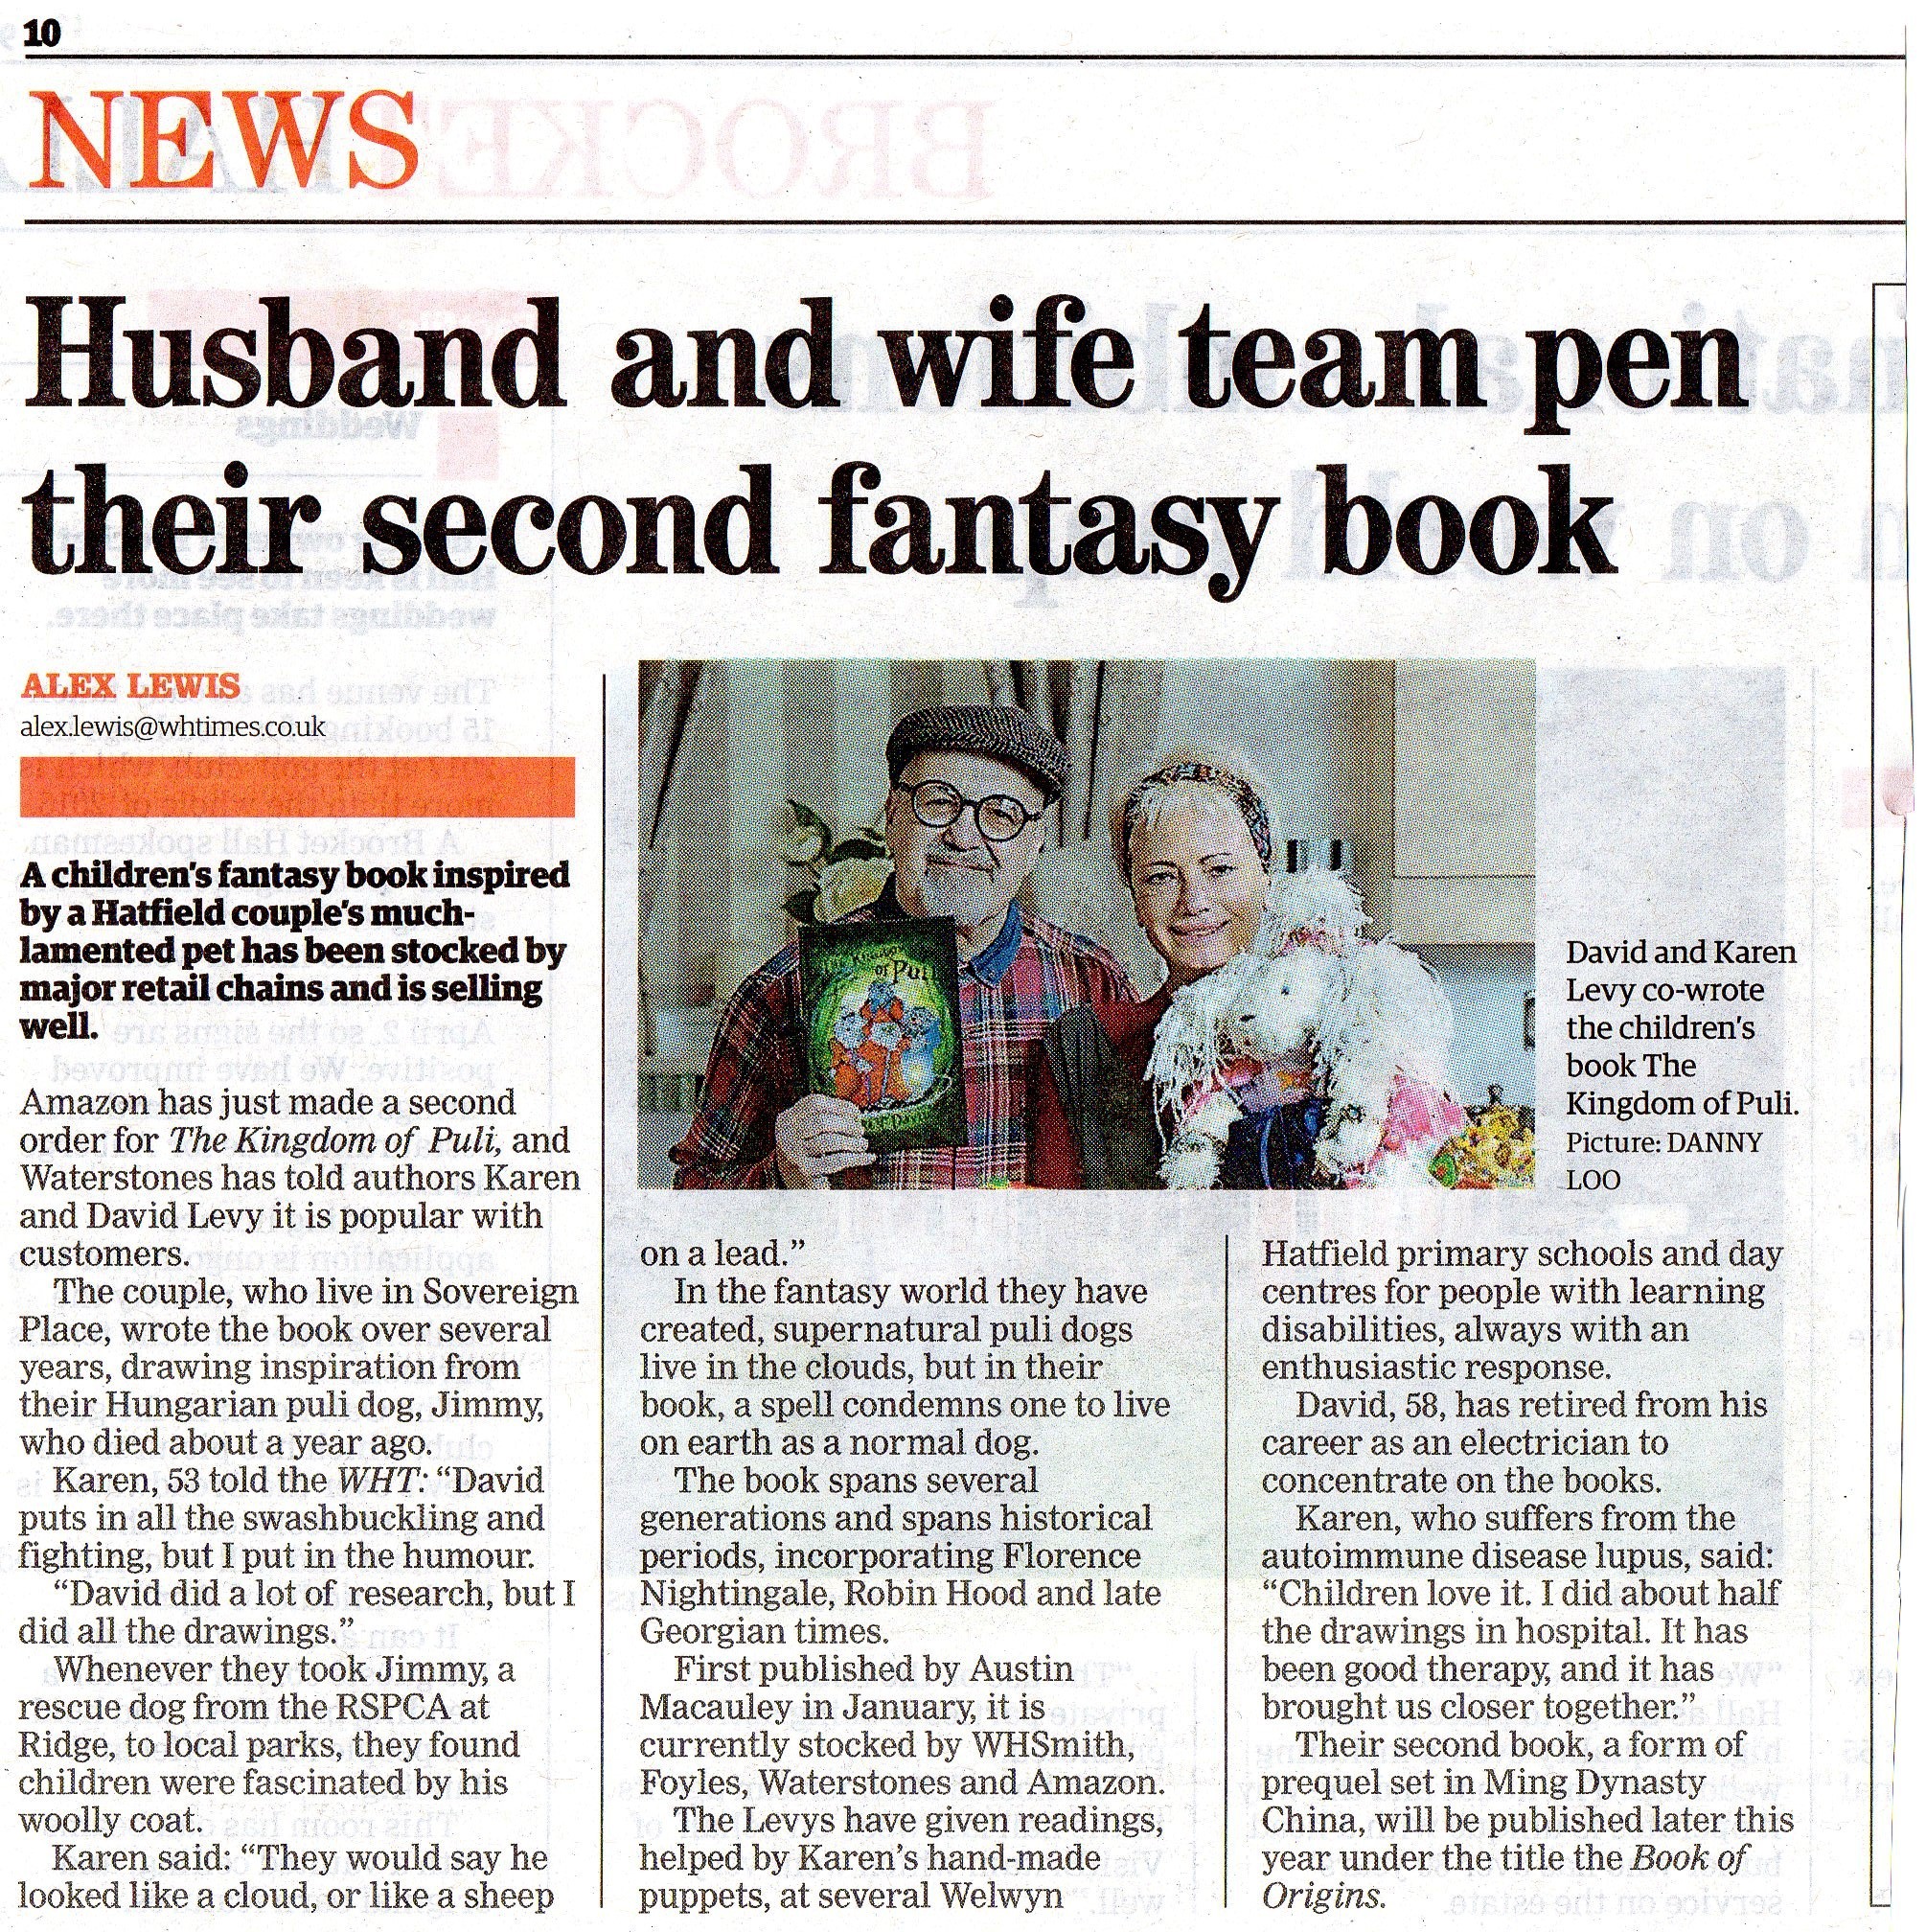 Read About Karen and David Levy in the Welwyn & Hatfield Times 